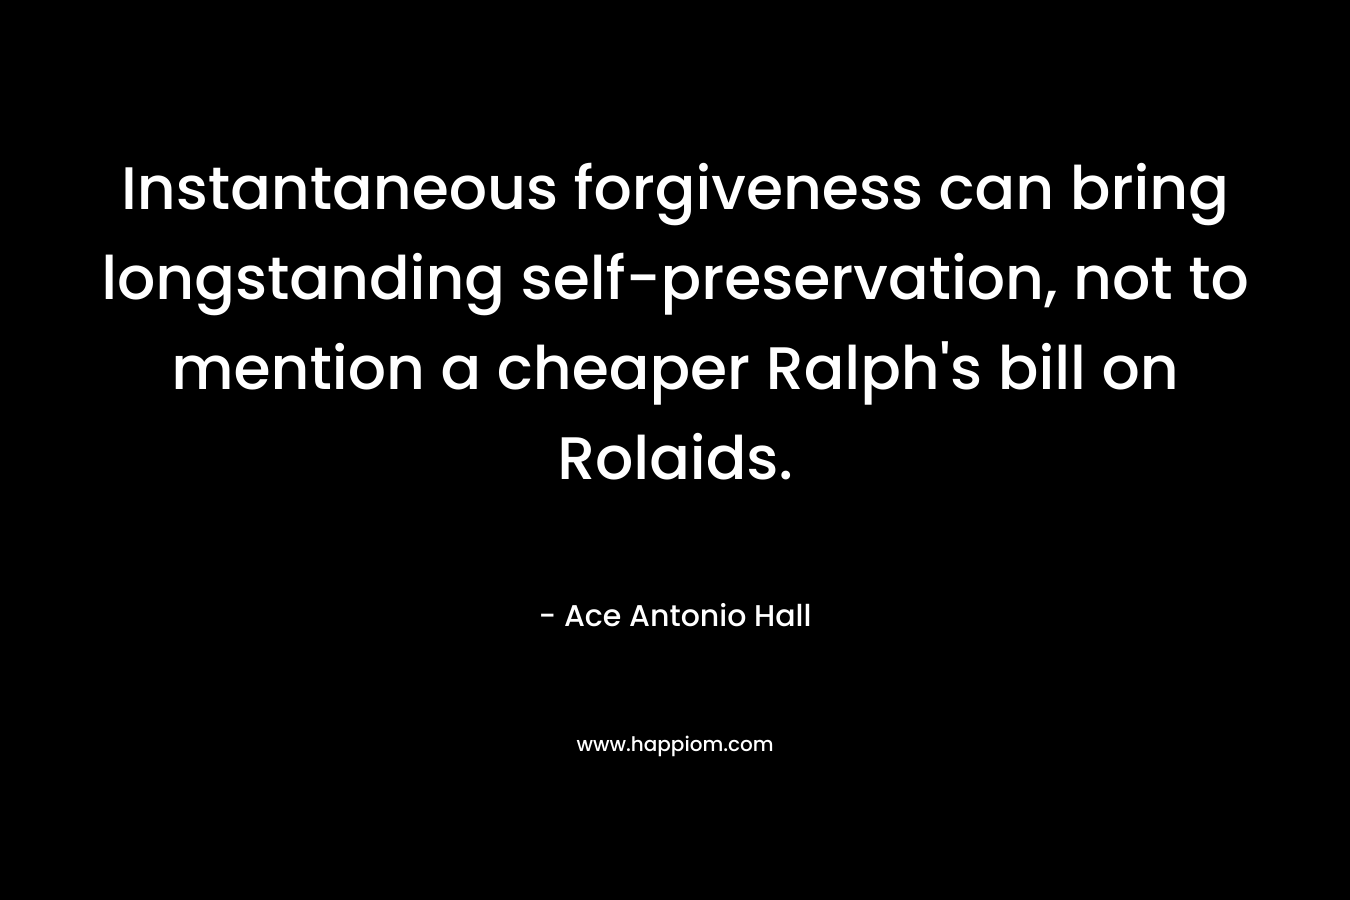 Instantaneous forgiveness can bring longstanding self-preservation, not to mention a cheaper Ralph’s bill on Rolaids. – Ace Antonio Hall